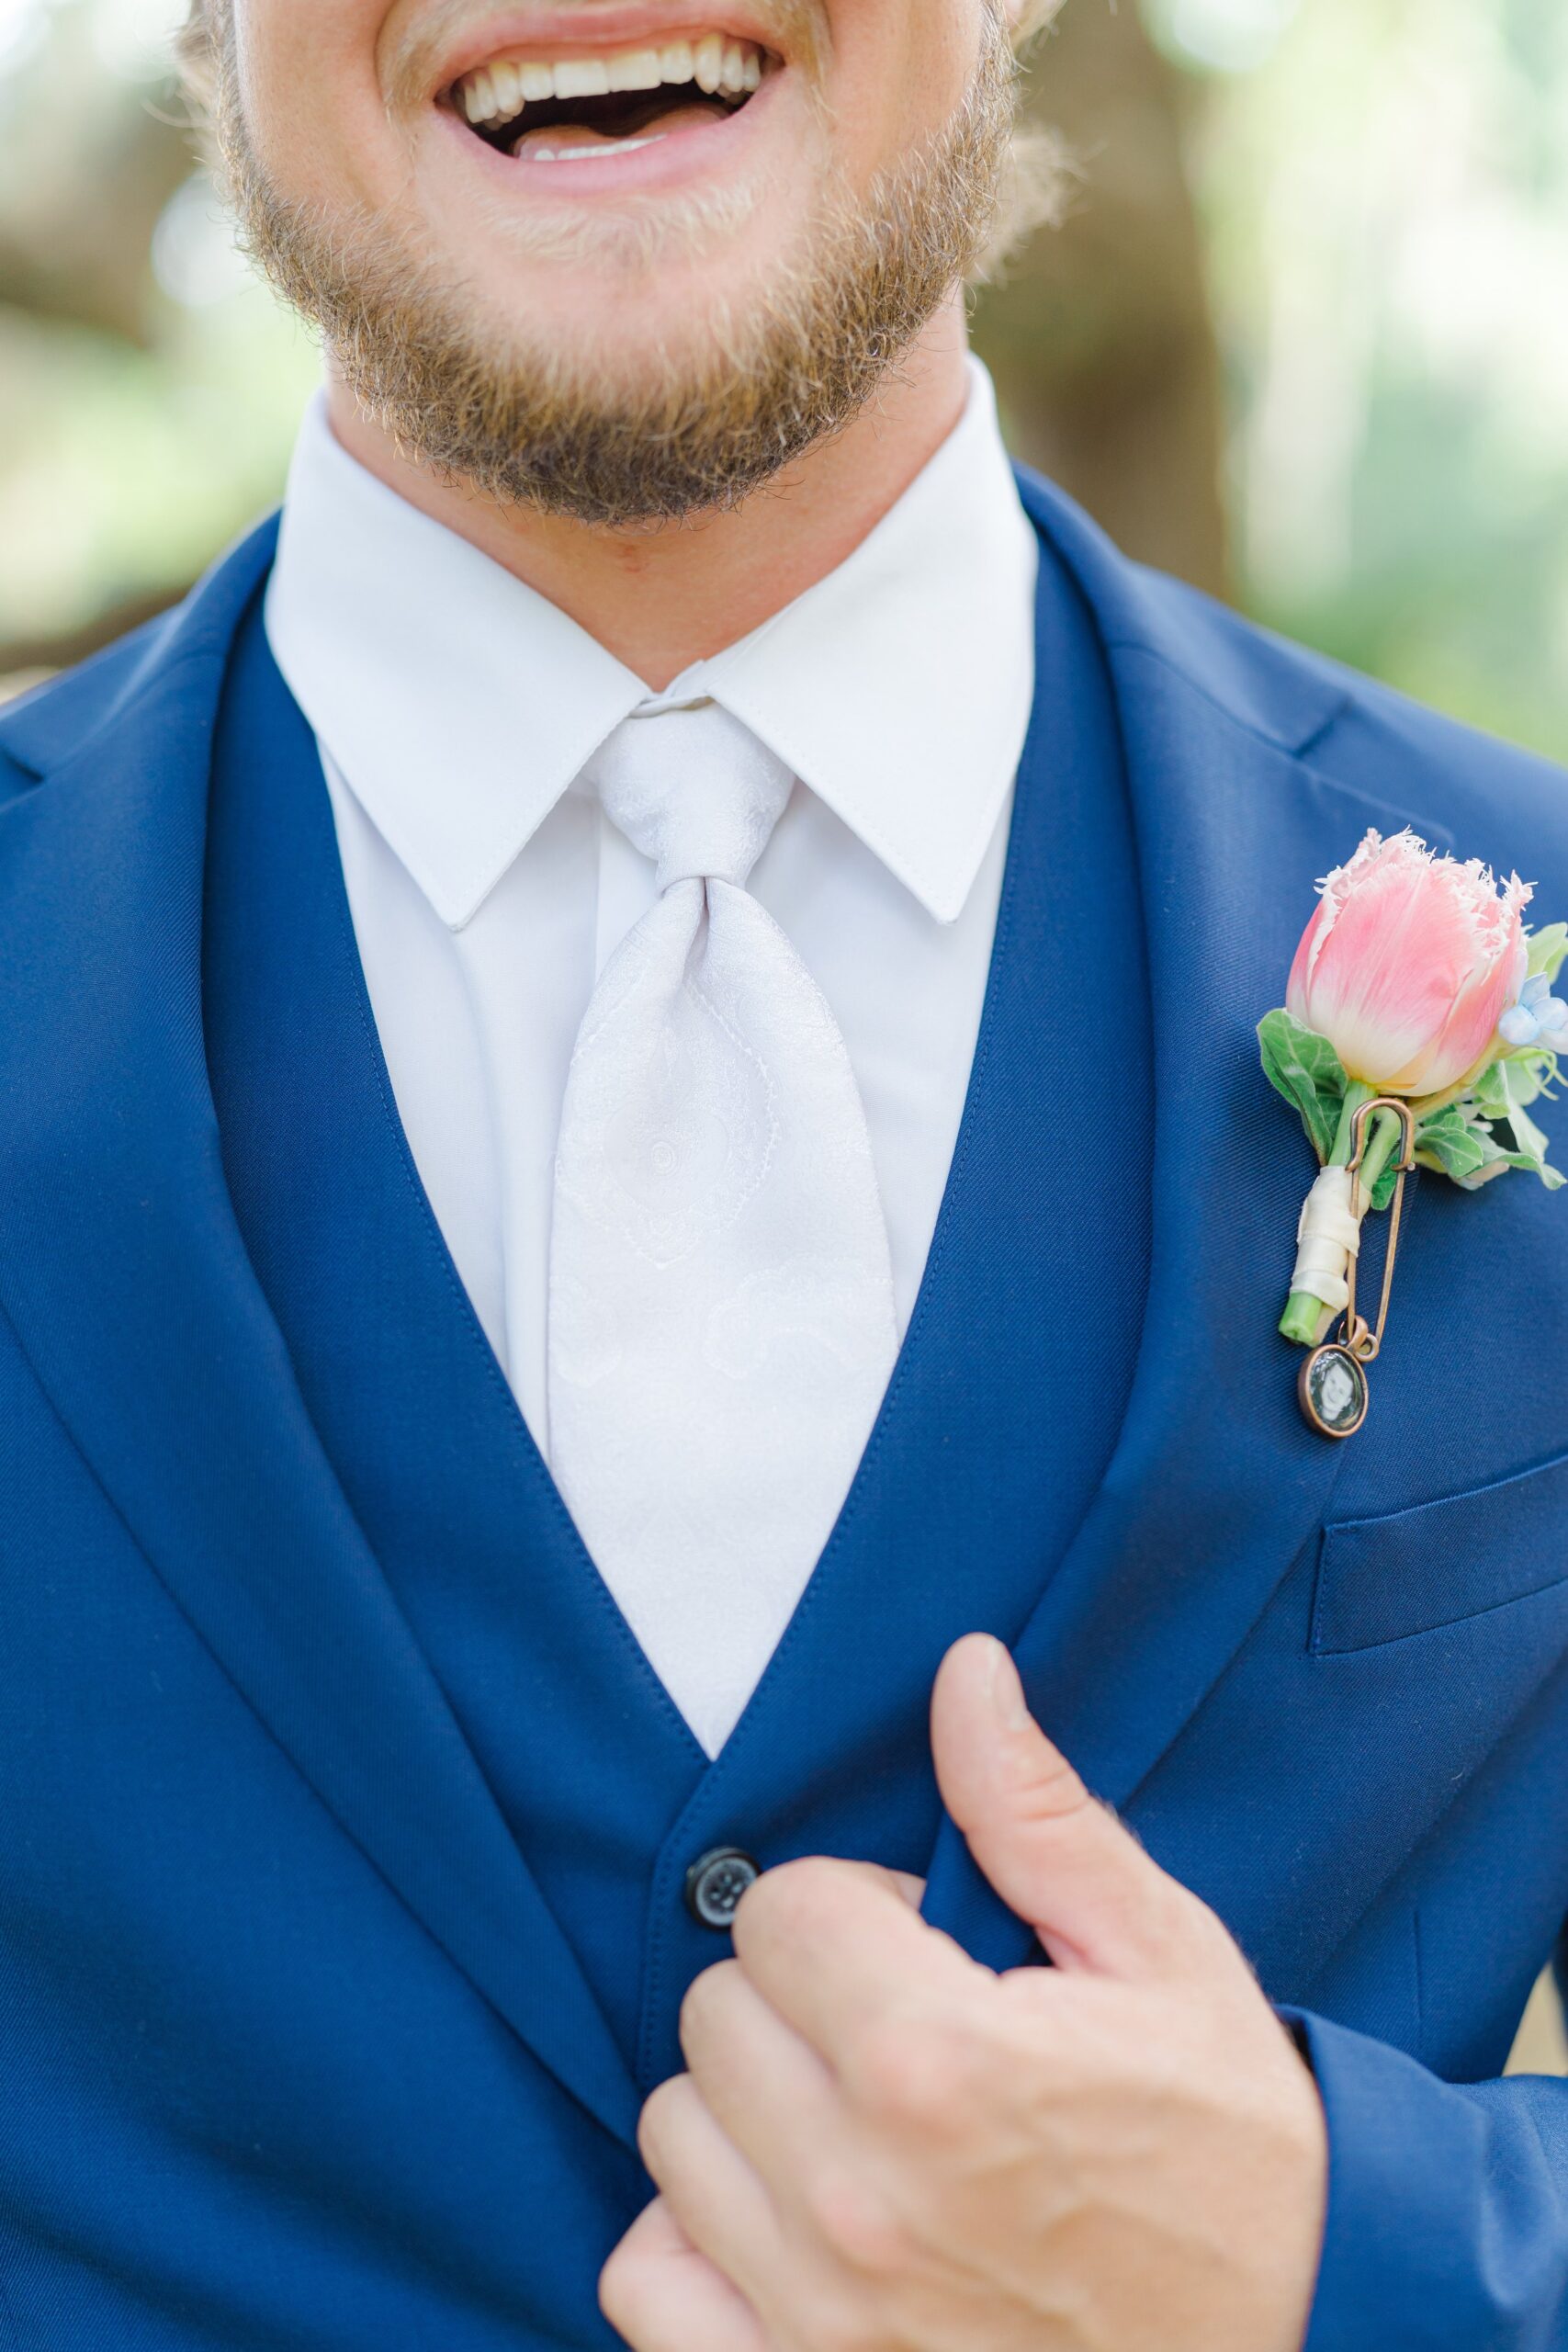 smiling groom in blue suit, white tie, and pink boutonniere